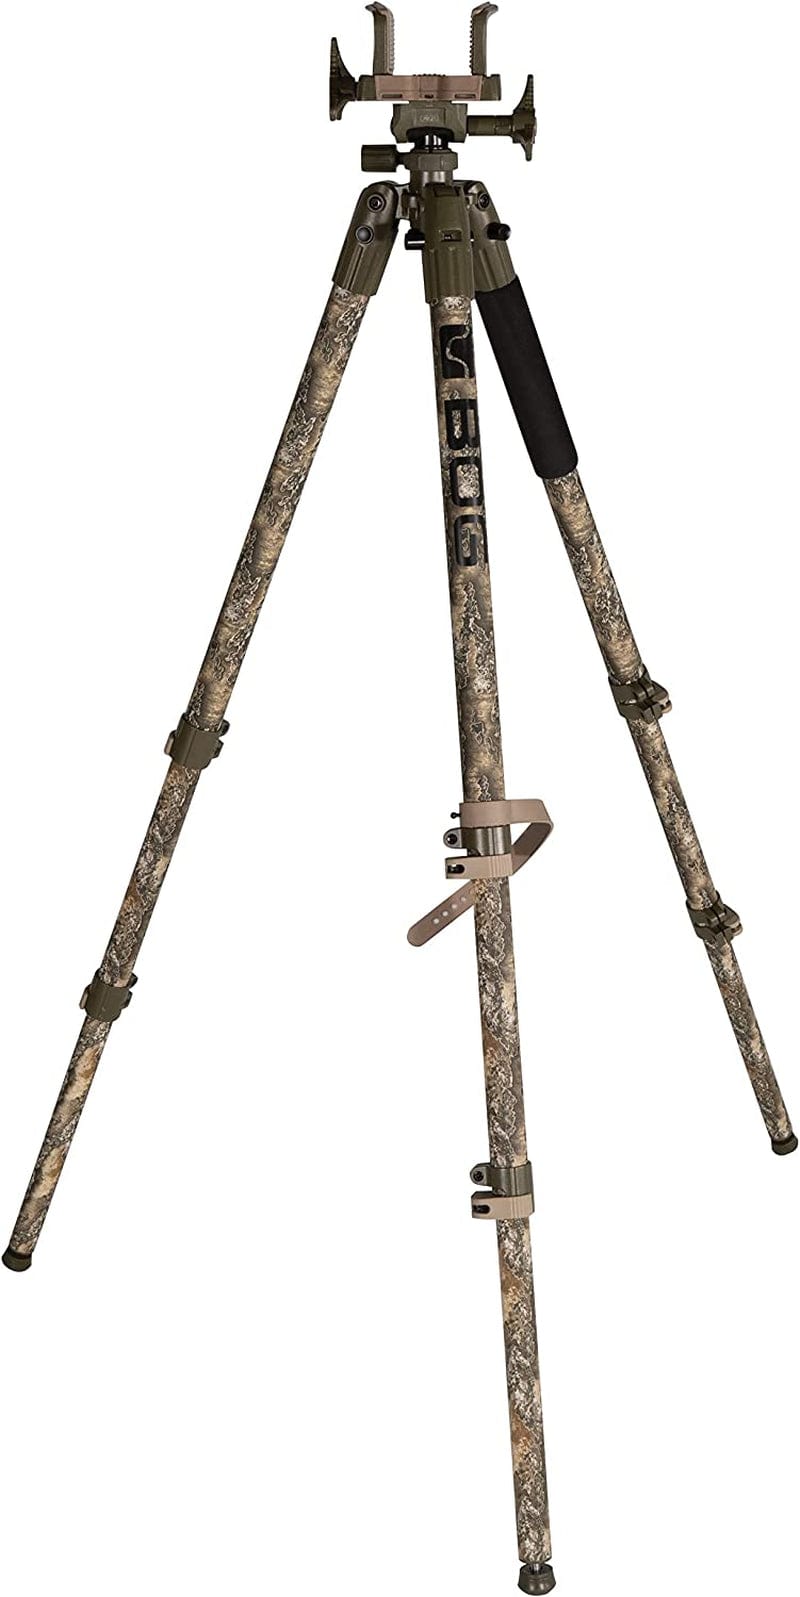 BOG Deathgrip Tripods with Durable Aluminum and Carbon Fiber Frames, Lightweight, Stable Design, Bubble Level, Adjustable Legs, and Hands-Free Operation for Hunting, Shooting, and Outdoors Sporting Goods > Outdoor Recreation > Winter Sports & Activities BOG Realtree Excape Camo Tripod 